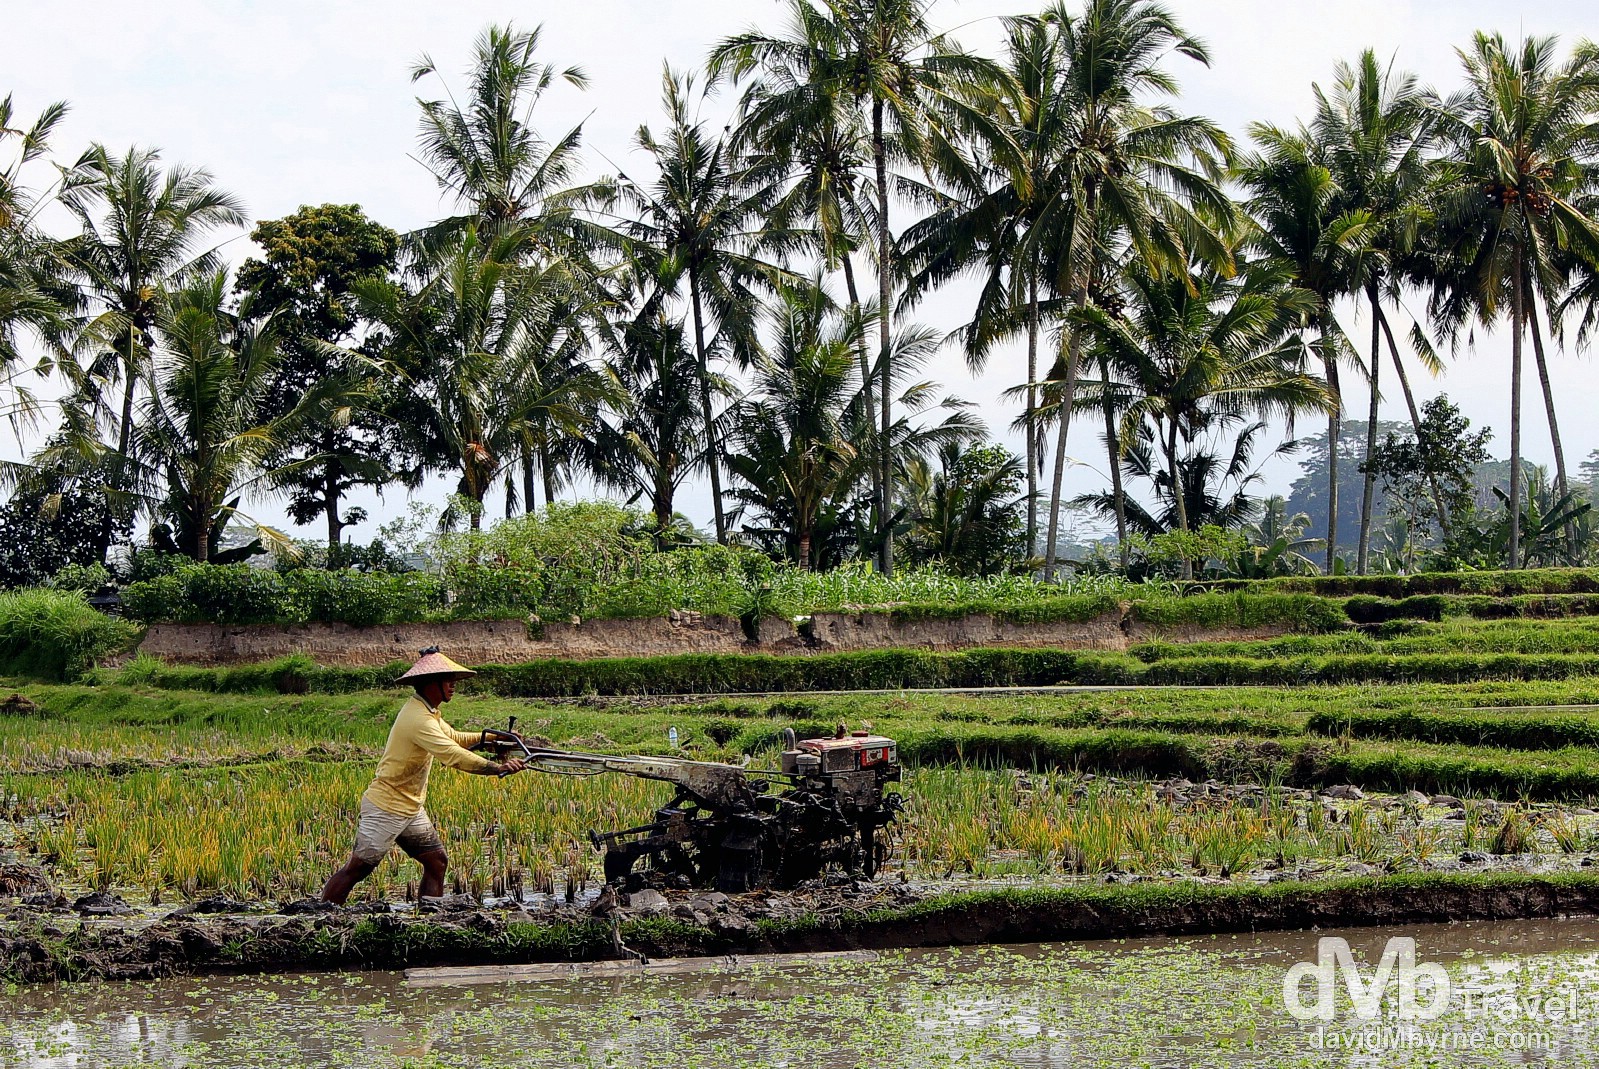 A paddy worker on the outskirts of Ubud, Bali, Indonesia. June 19th 2012. 